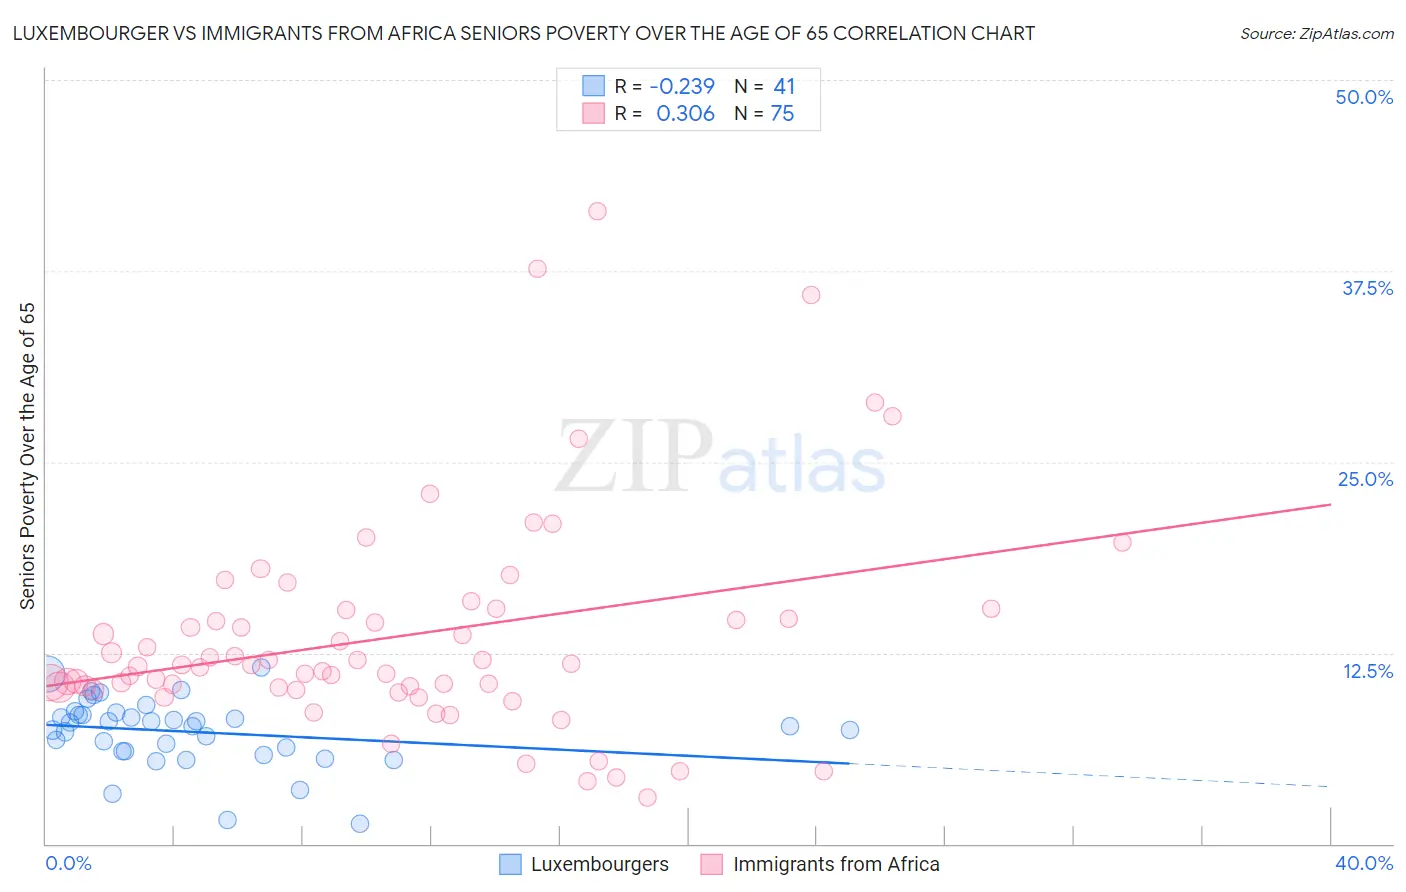 Luxembourger vs Immigrants from Africa Seniors Poverty Over the Age of 65